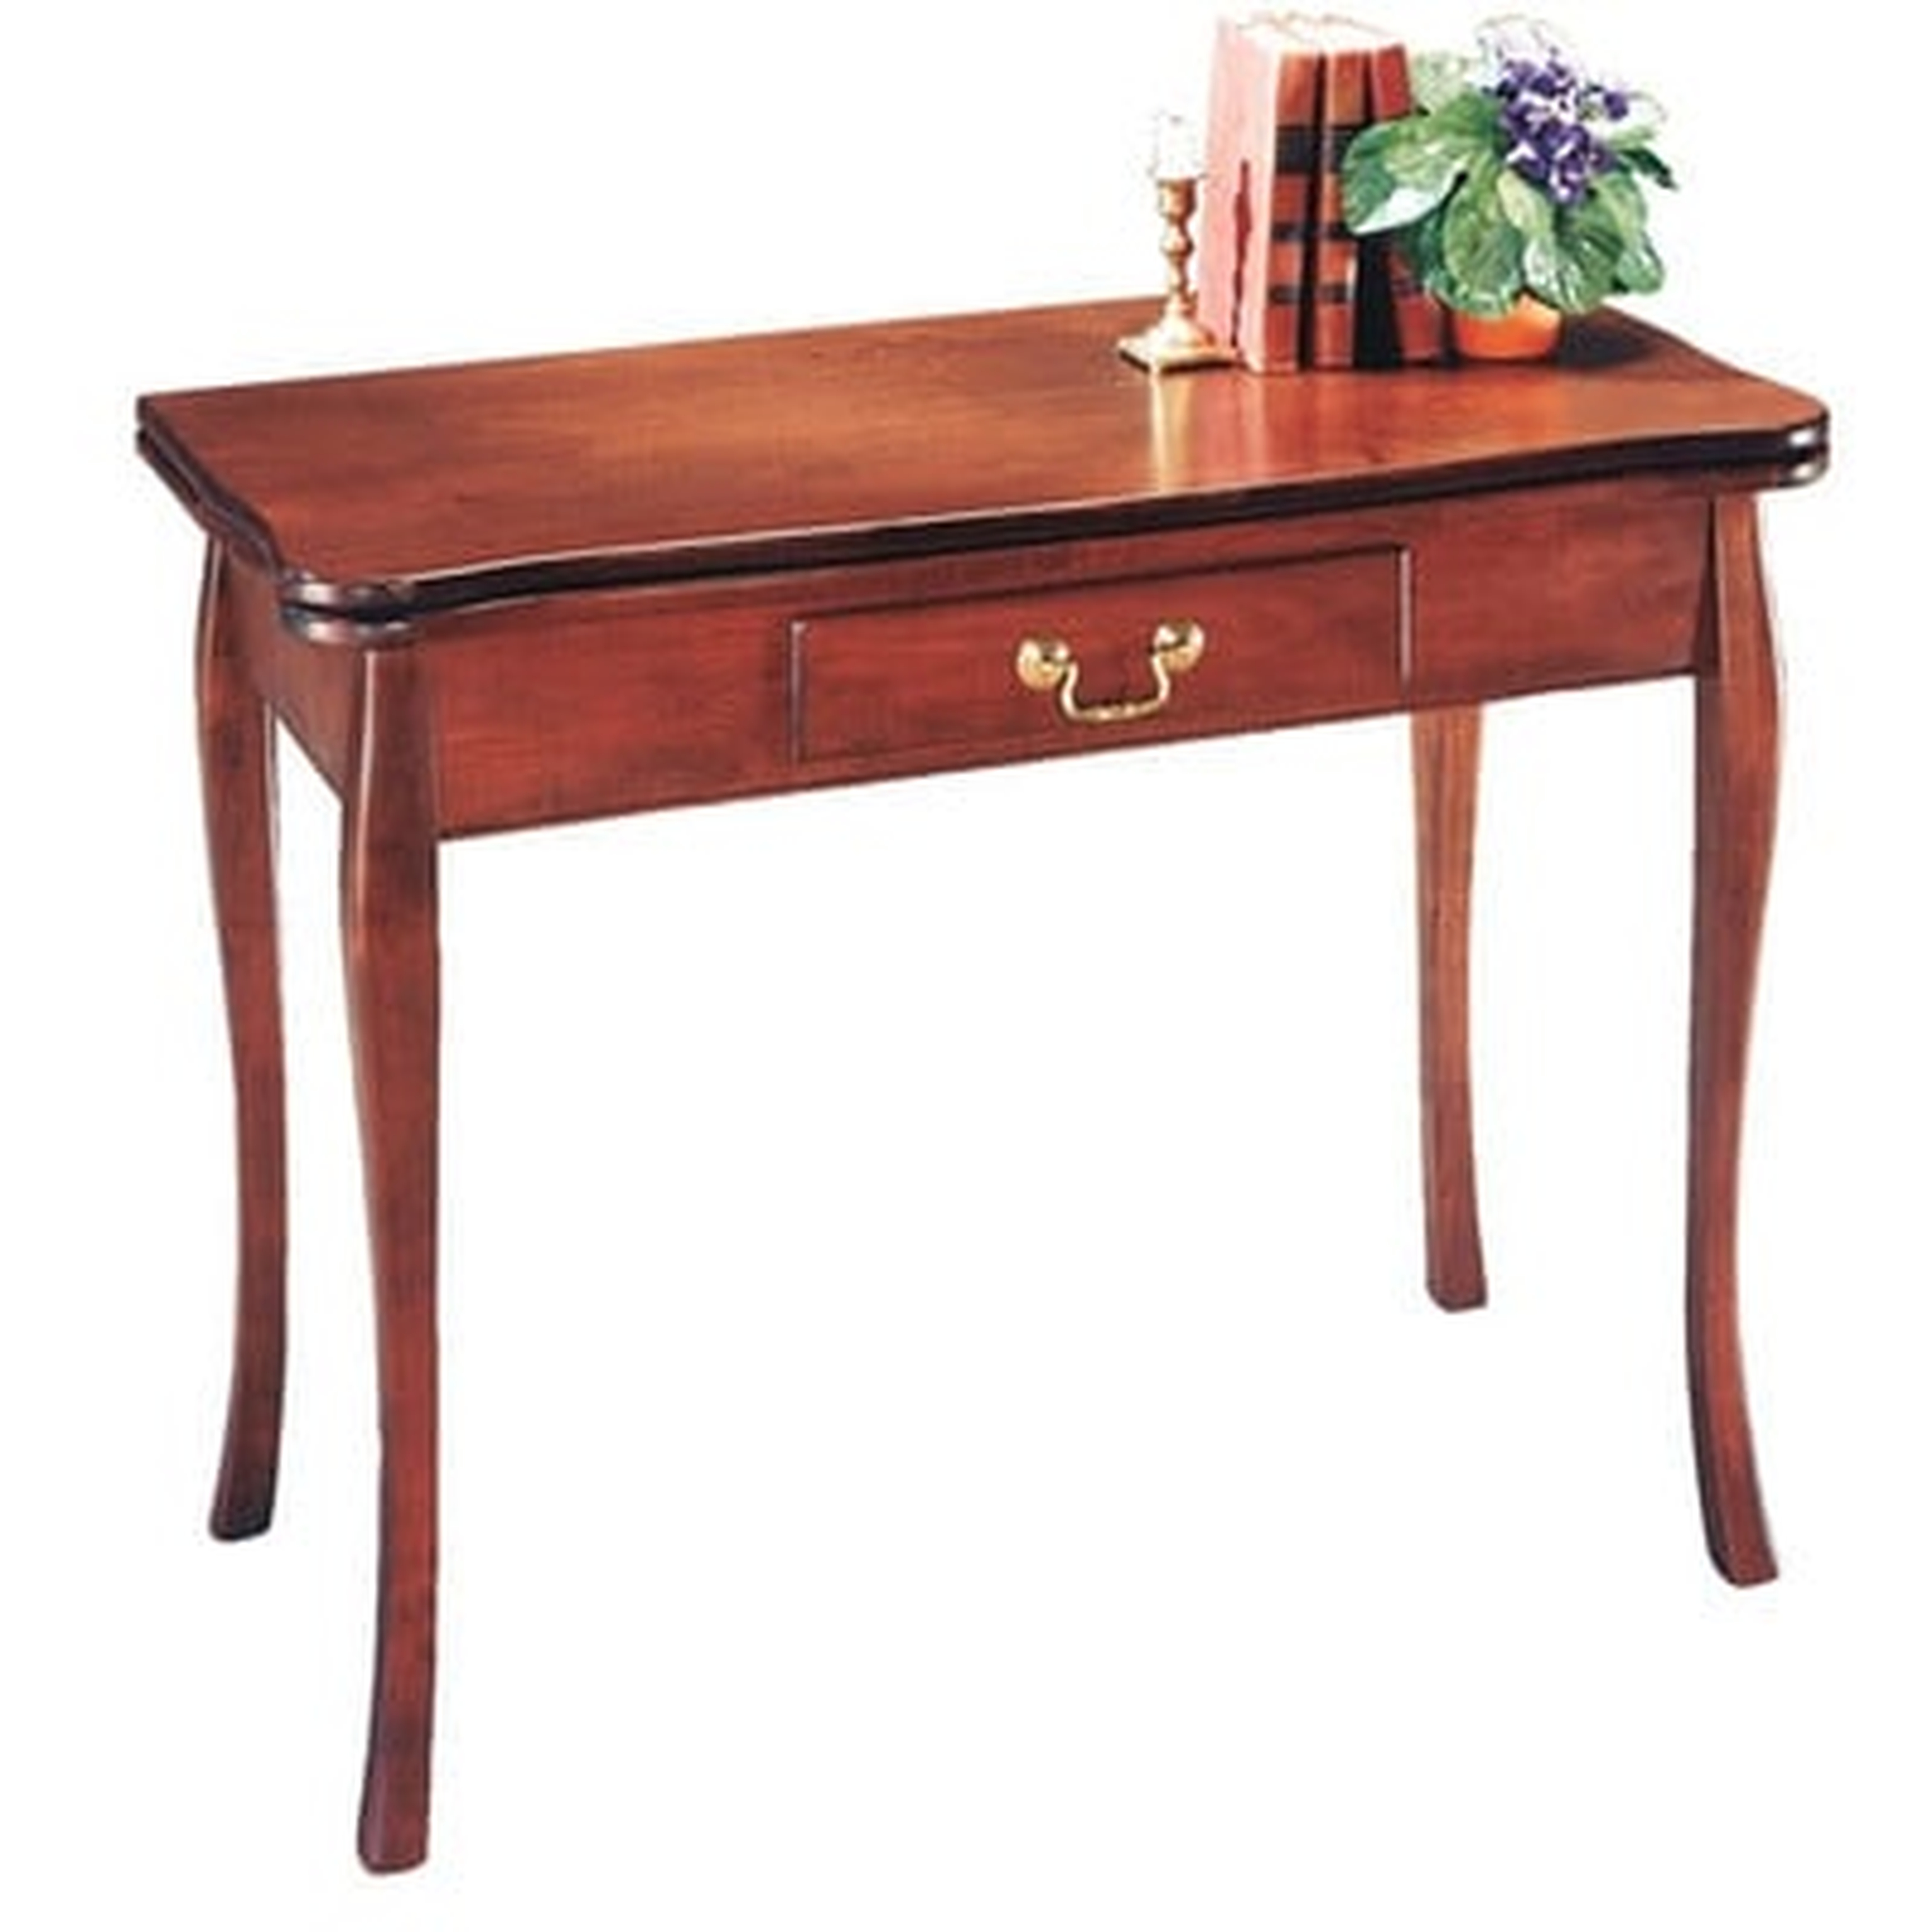 Divernon Traditional Extendable Dining Table - Wayfair